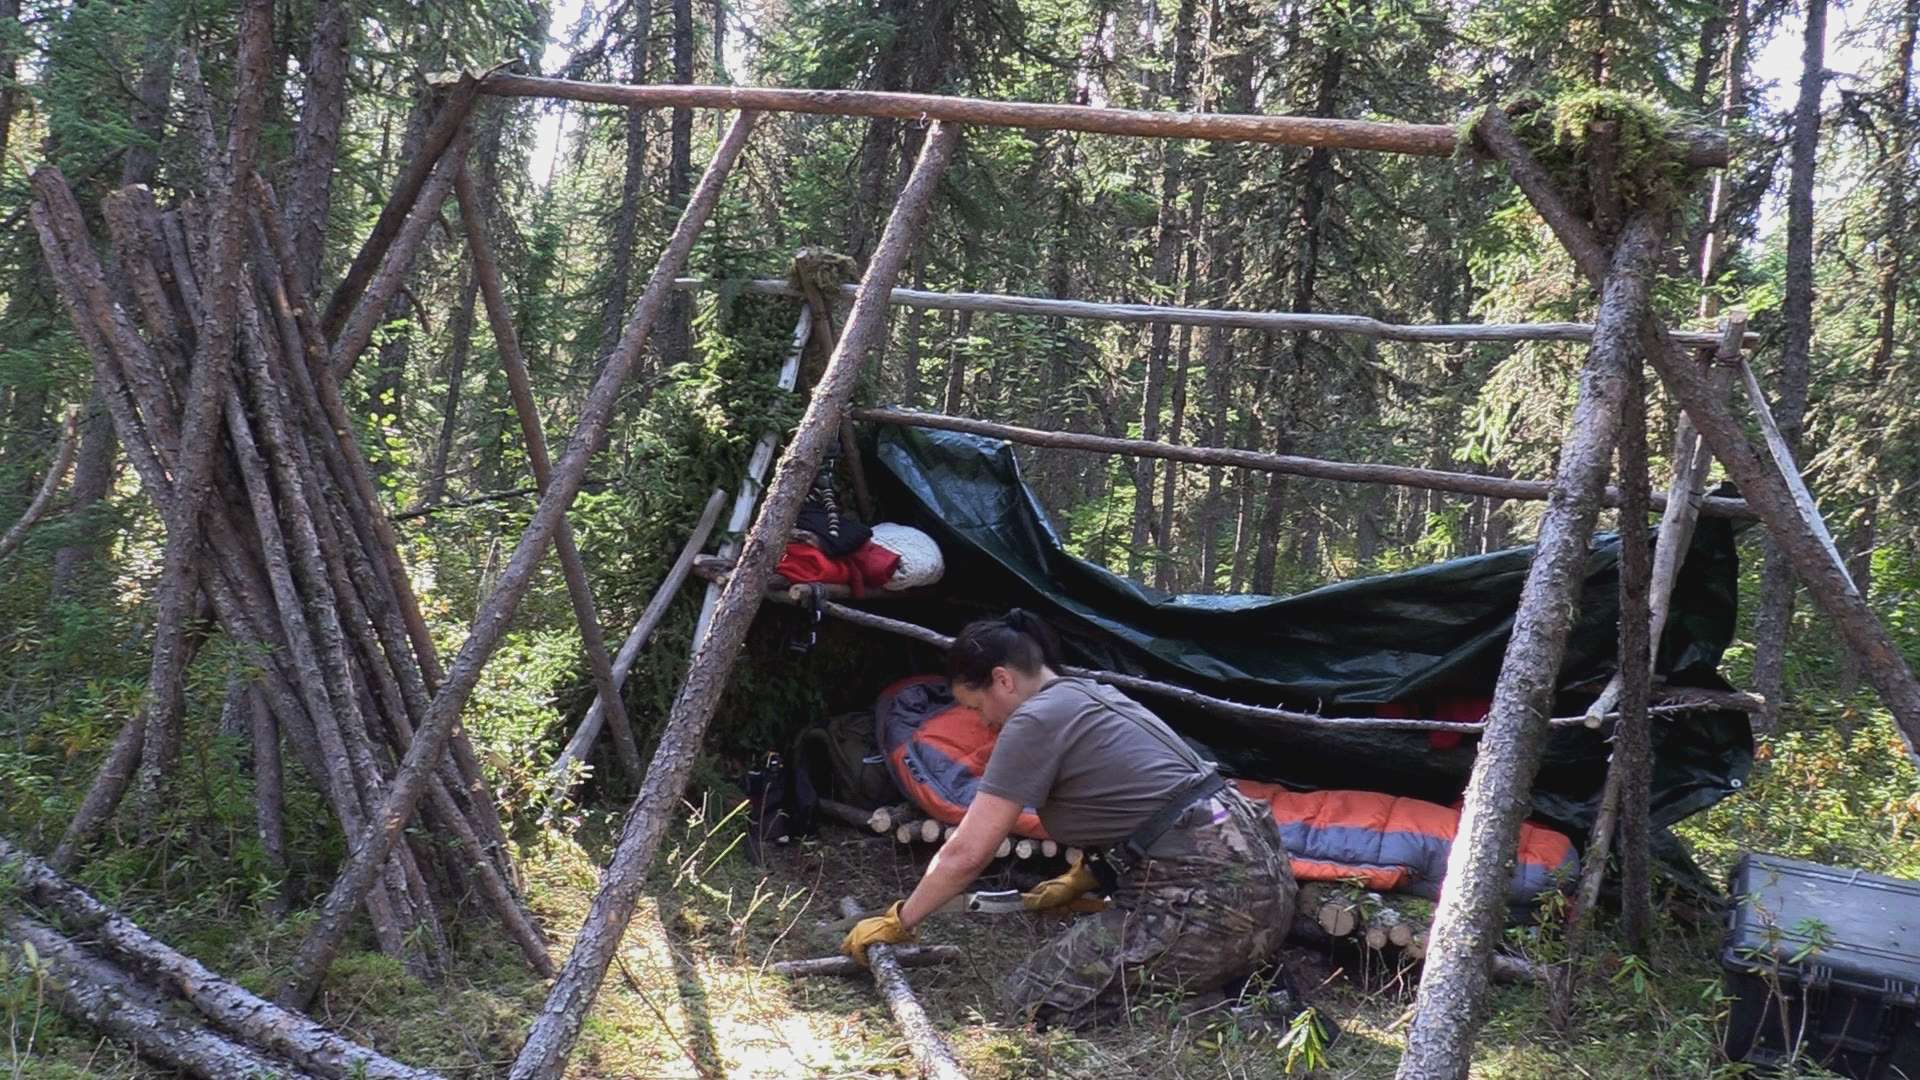 Melanie Sawyer builds her shelter in the Canadian wilderness on Season 10 of the History Channel's show "Alone."